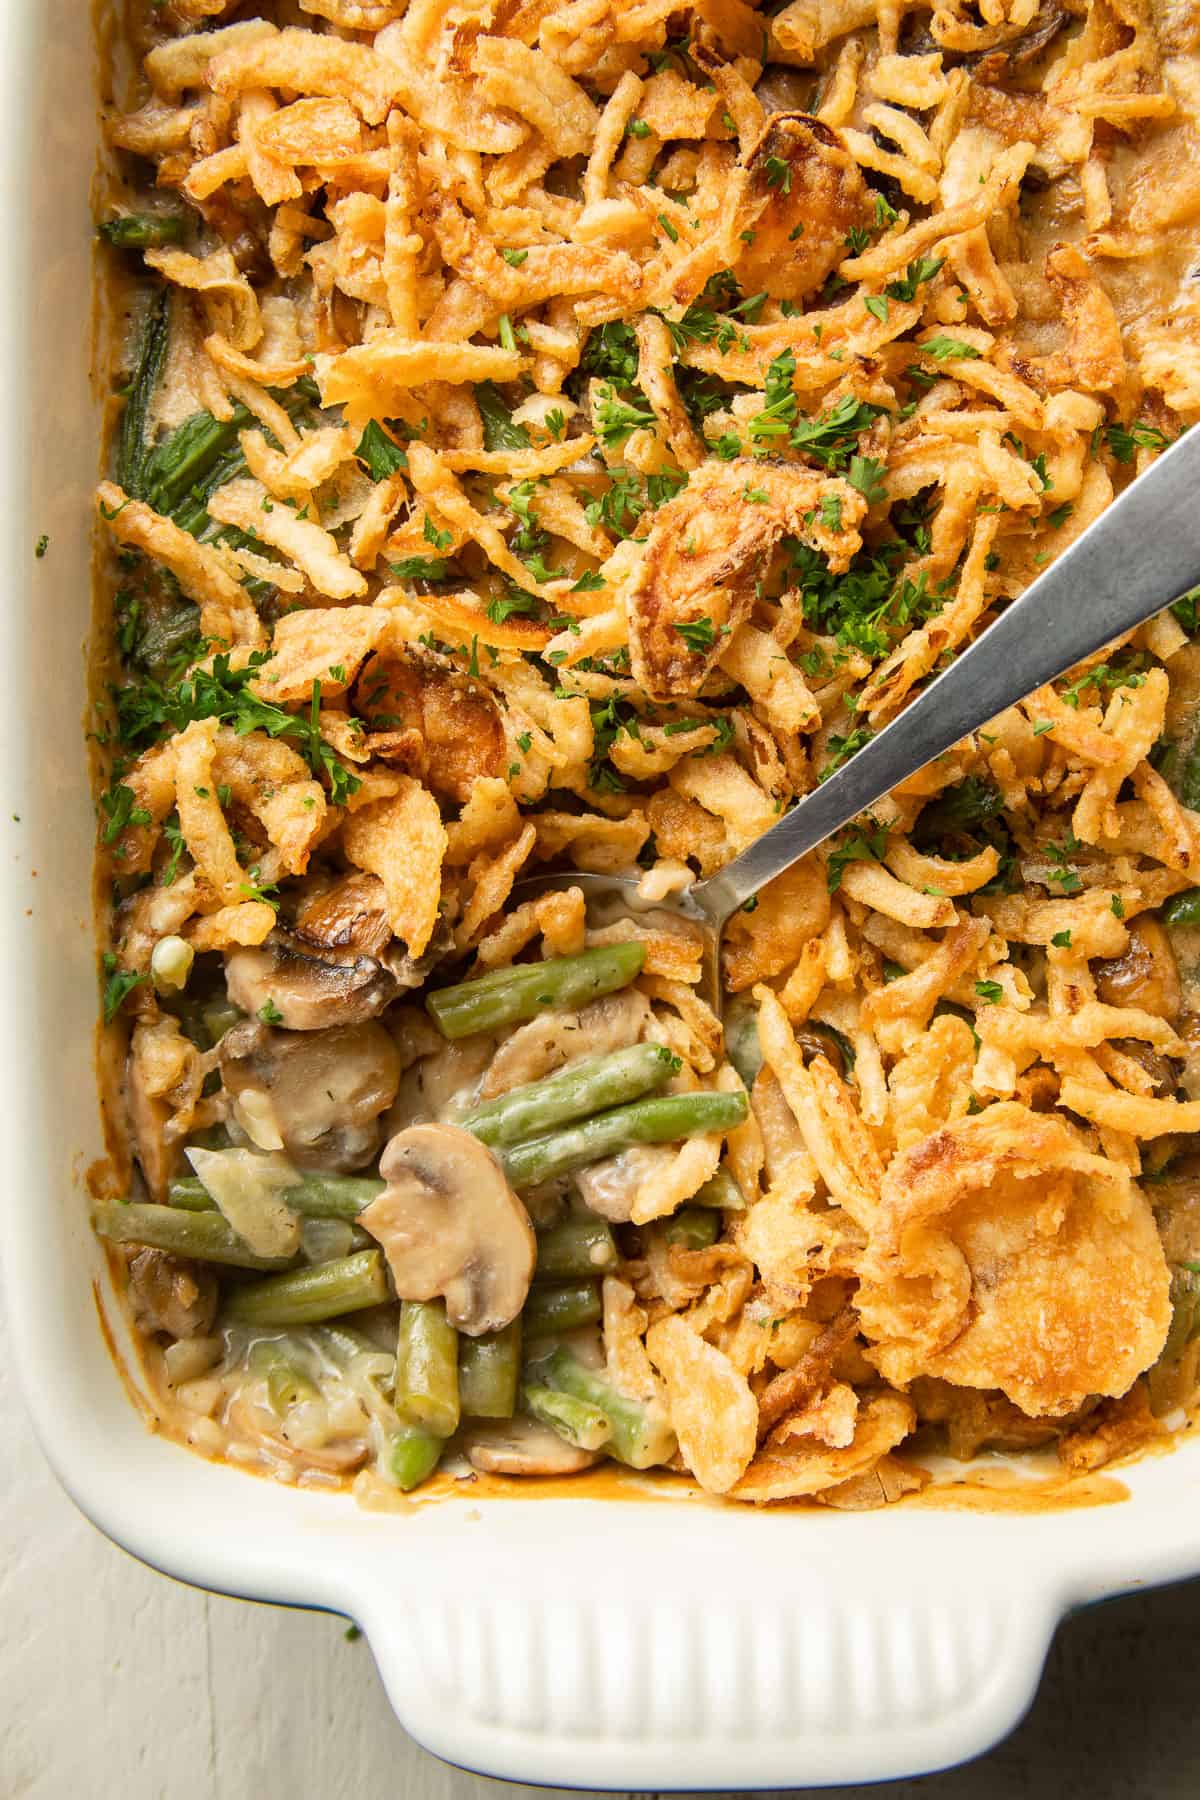 Overhead view of casserole dish of Vegan Green Bean Casserole with serving spoon.